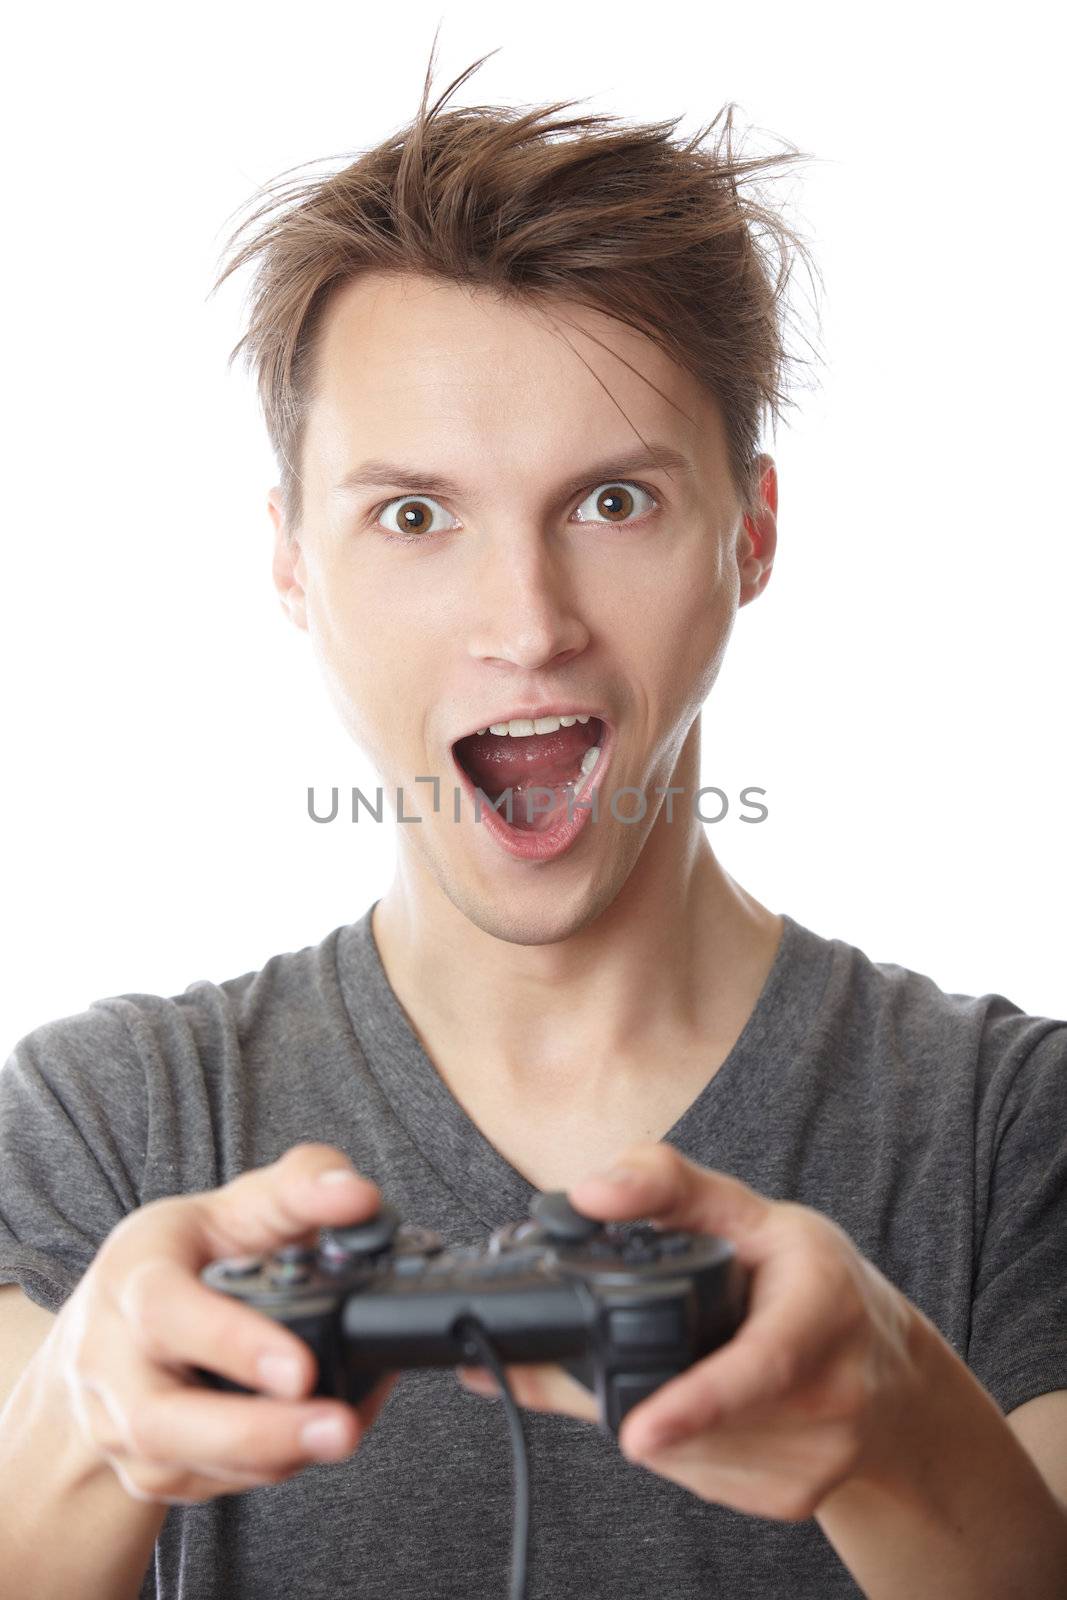 Man playing computer game and using joystick on a white background